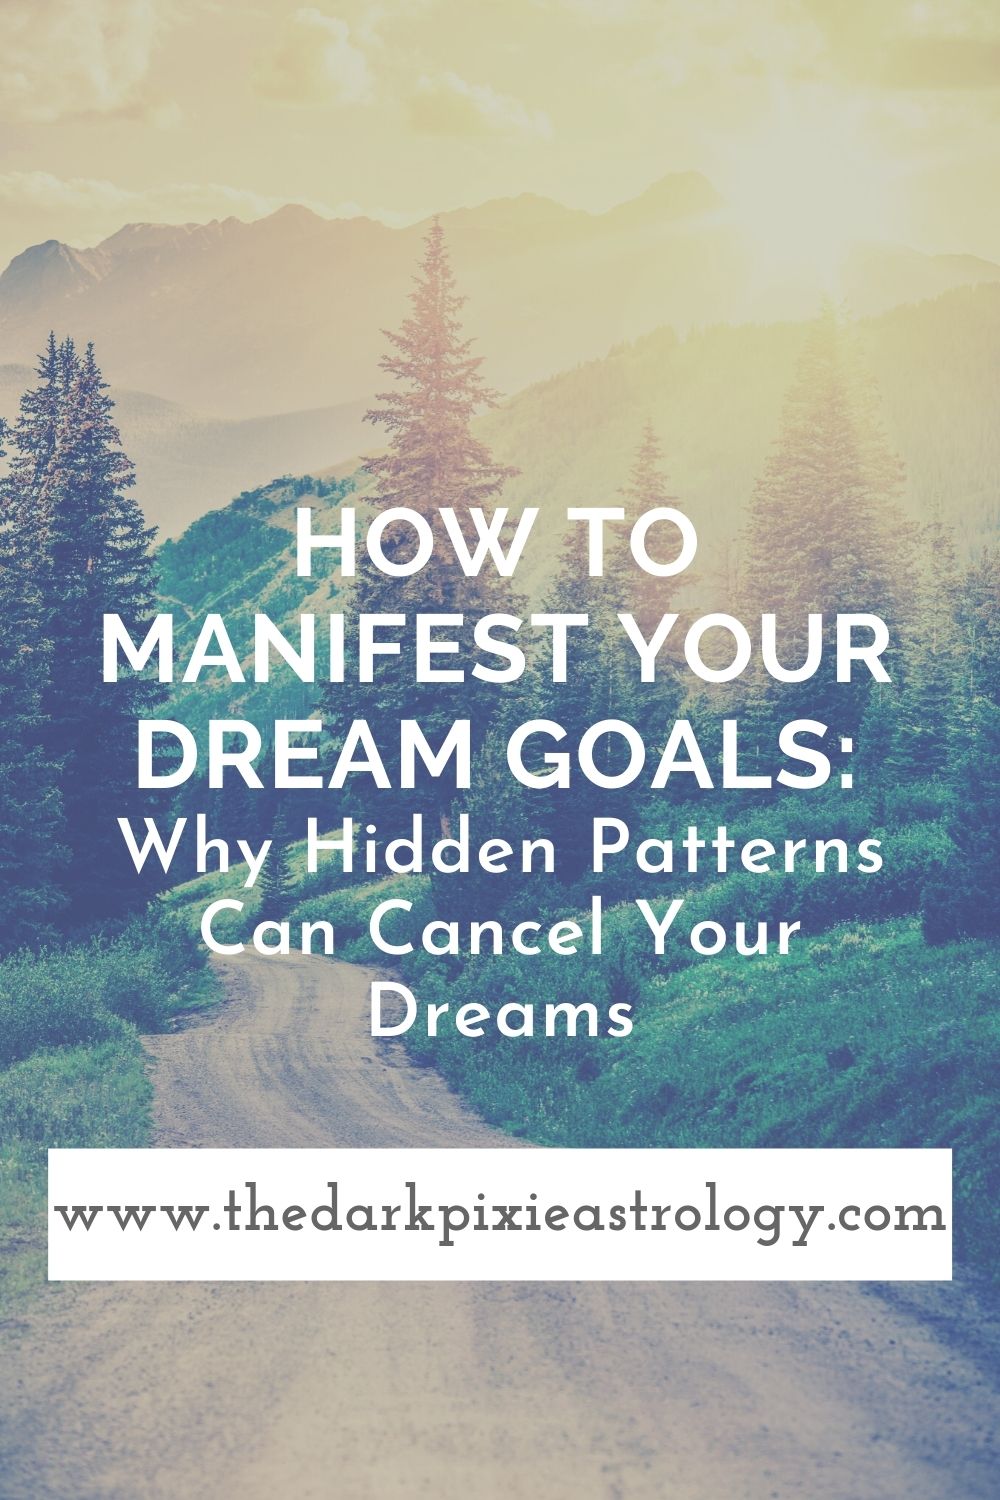 How to Manifest Your Dream Goals: Why Hidden Patterns Can Cancel Your Dreams - The Dark Pixie Astrology